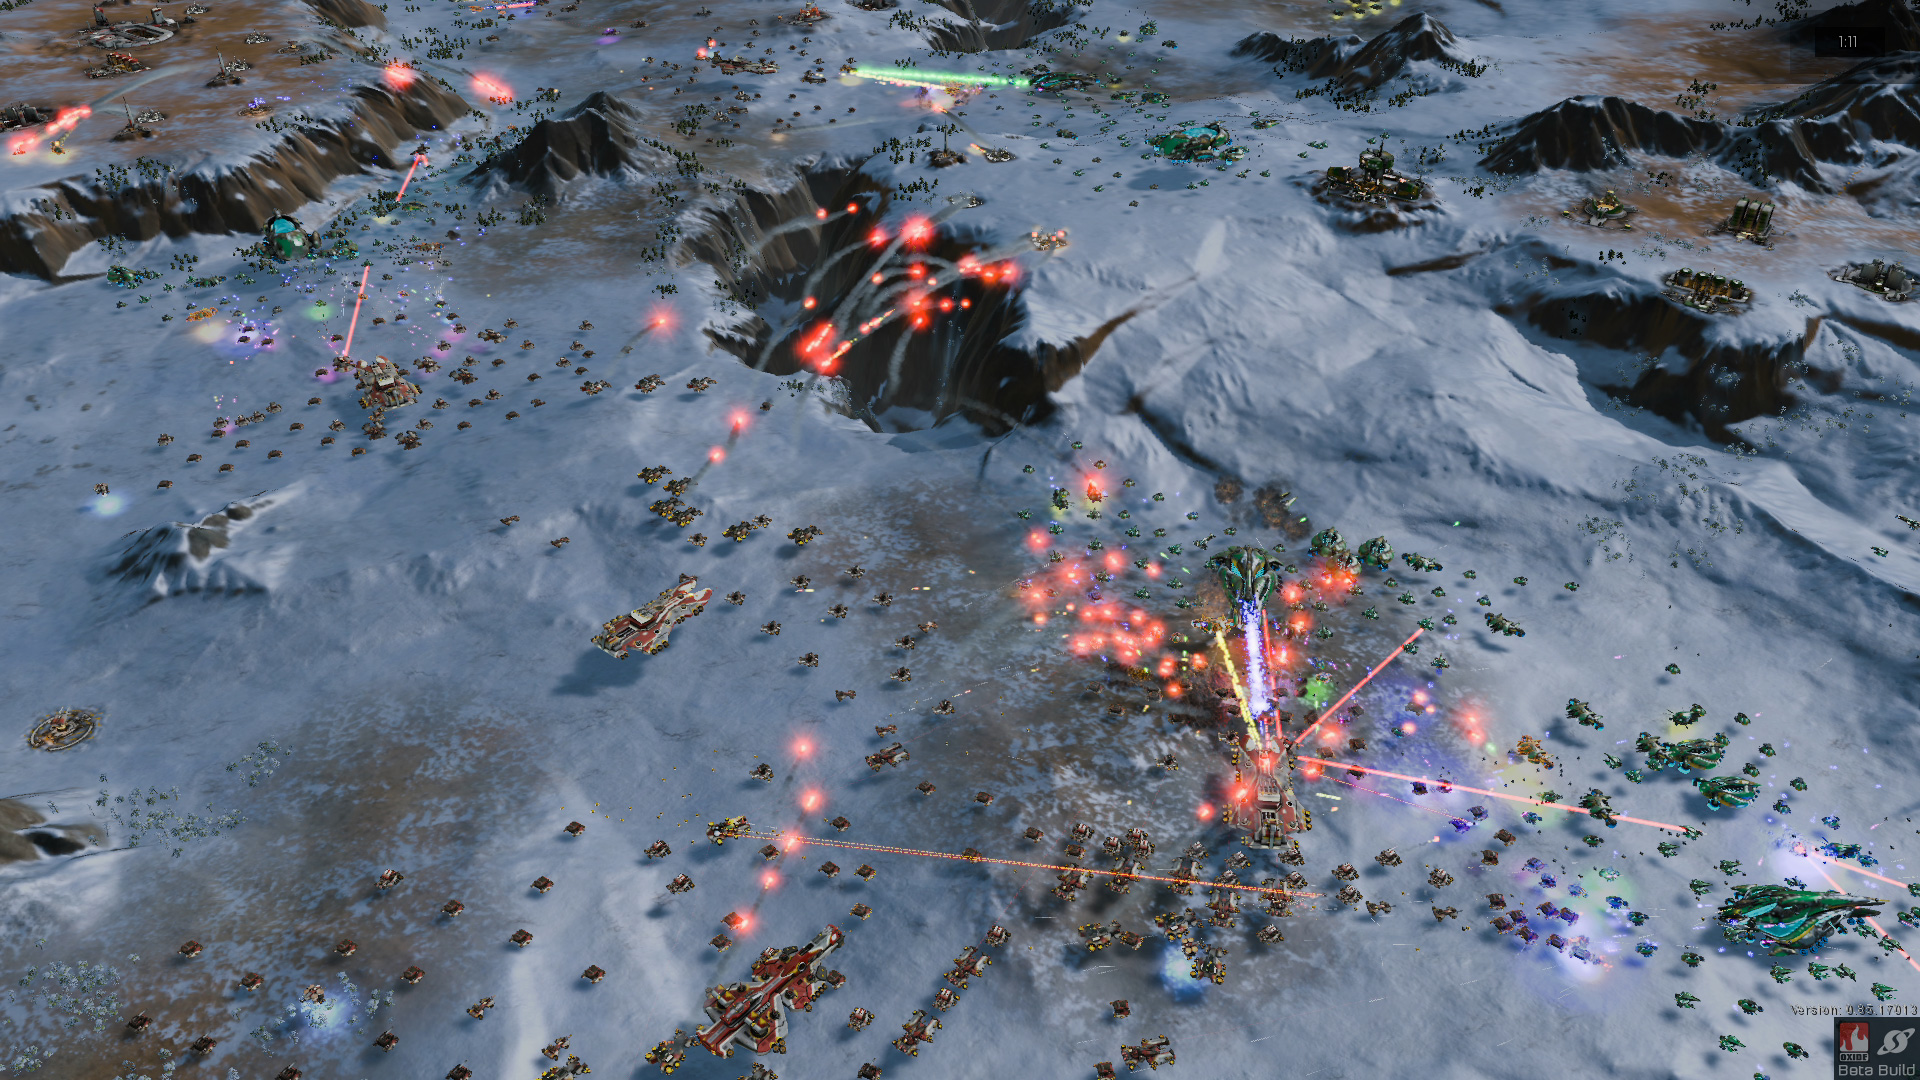 DirectX 12 vs. DirectX 11 - Ashes of the Singularity Revisited: A